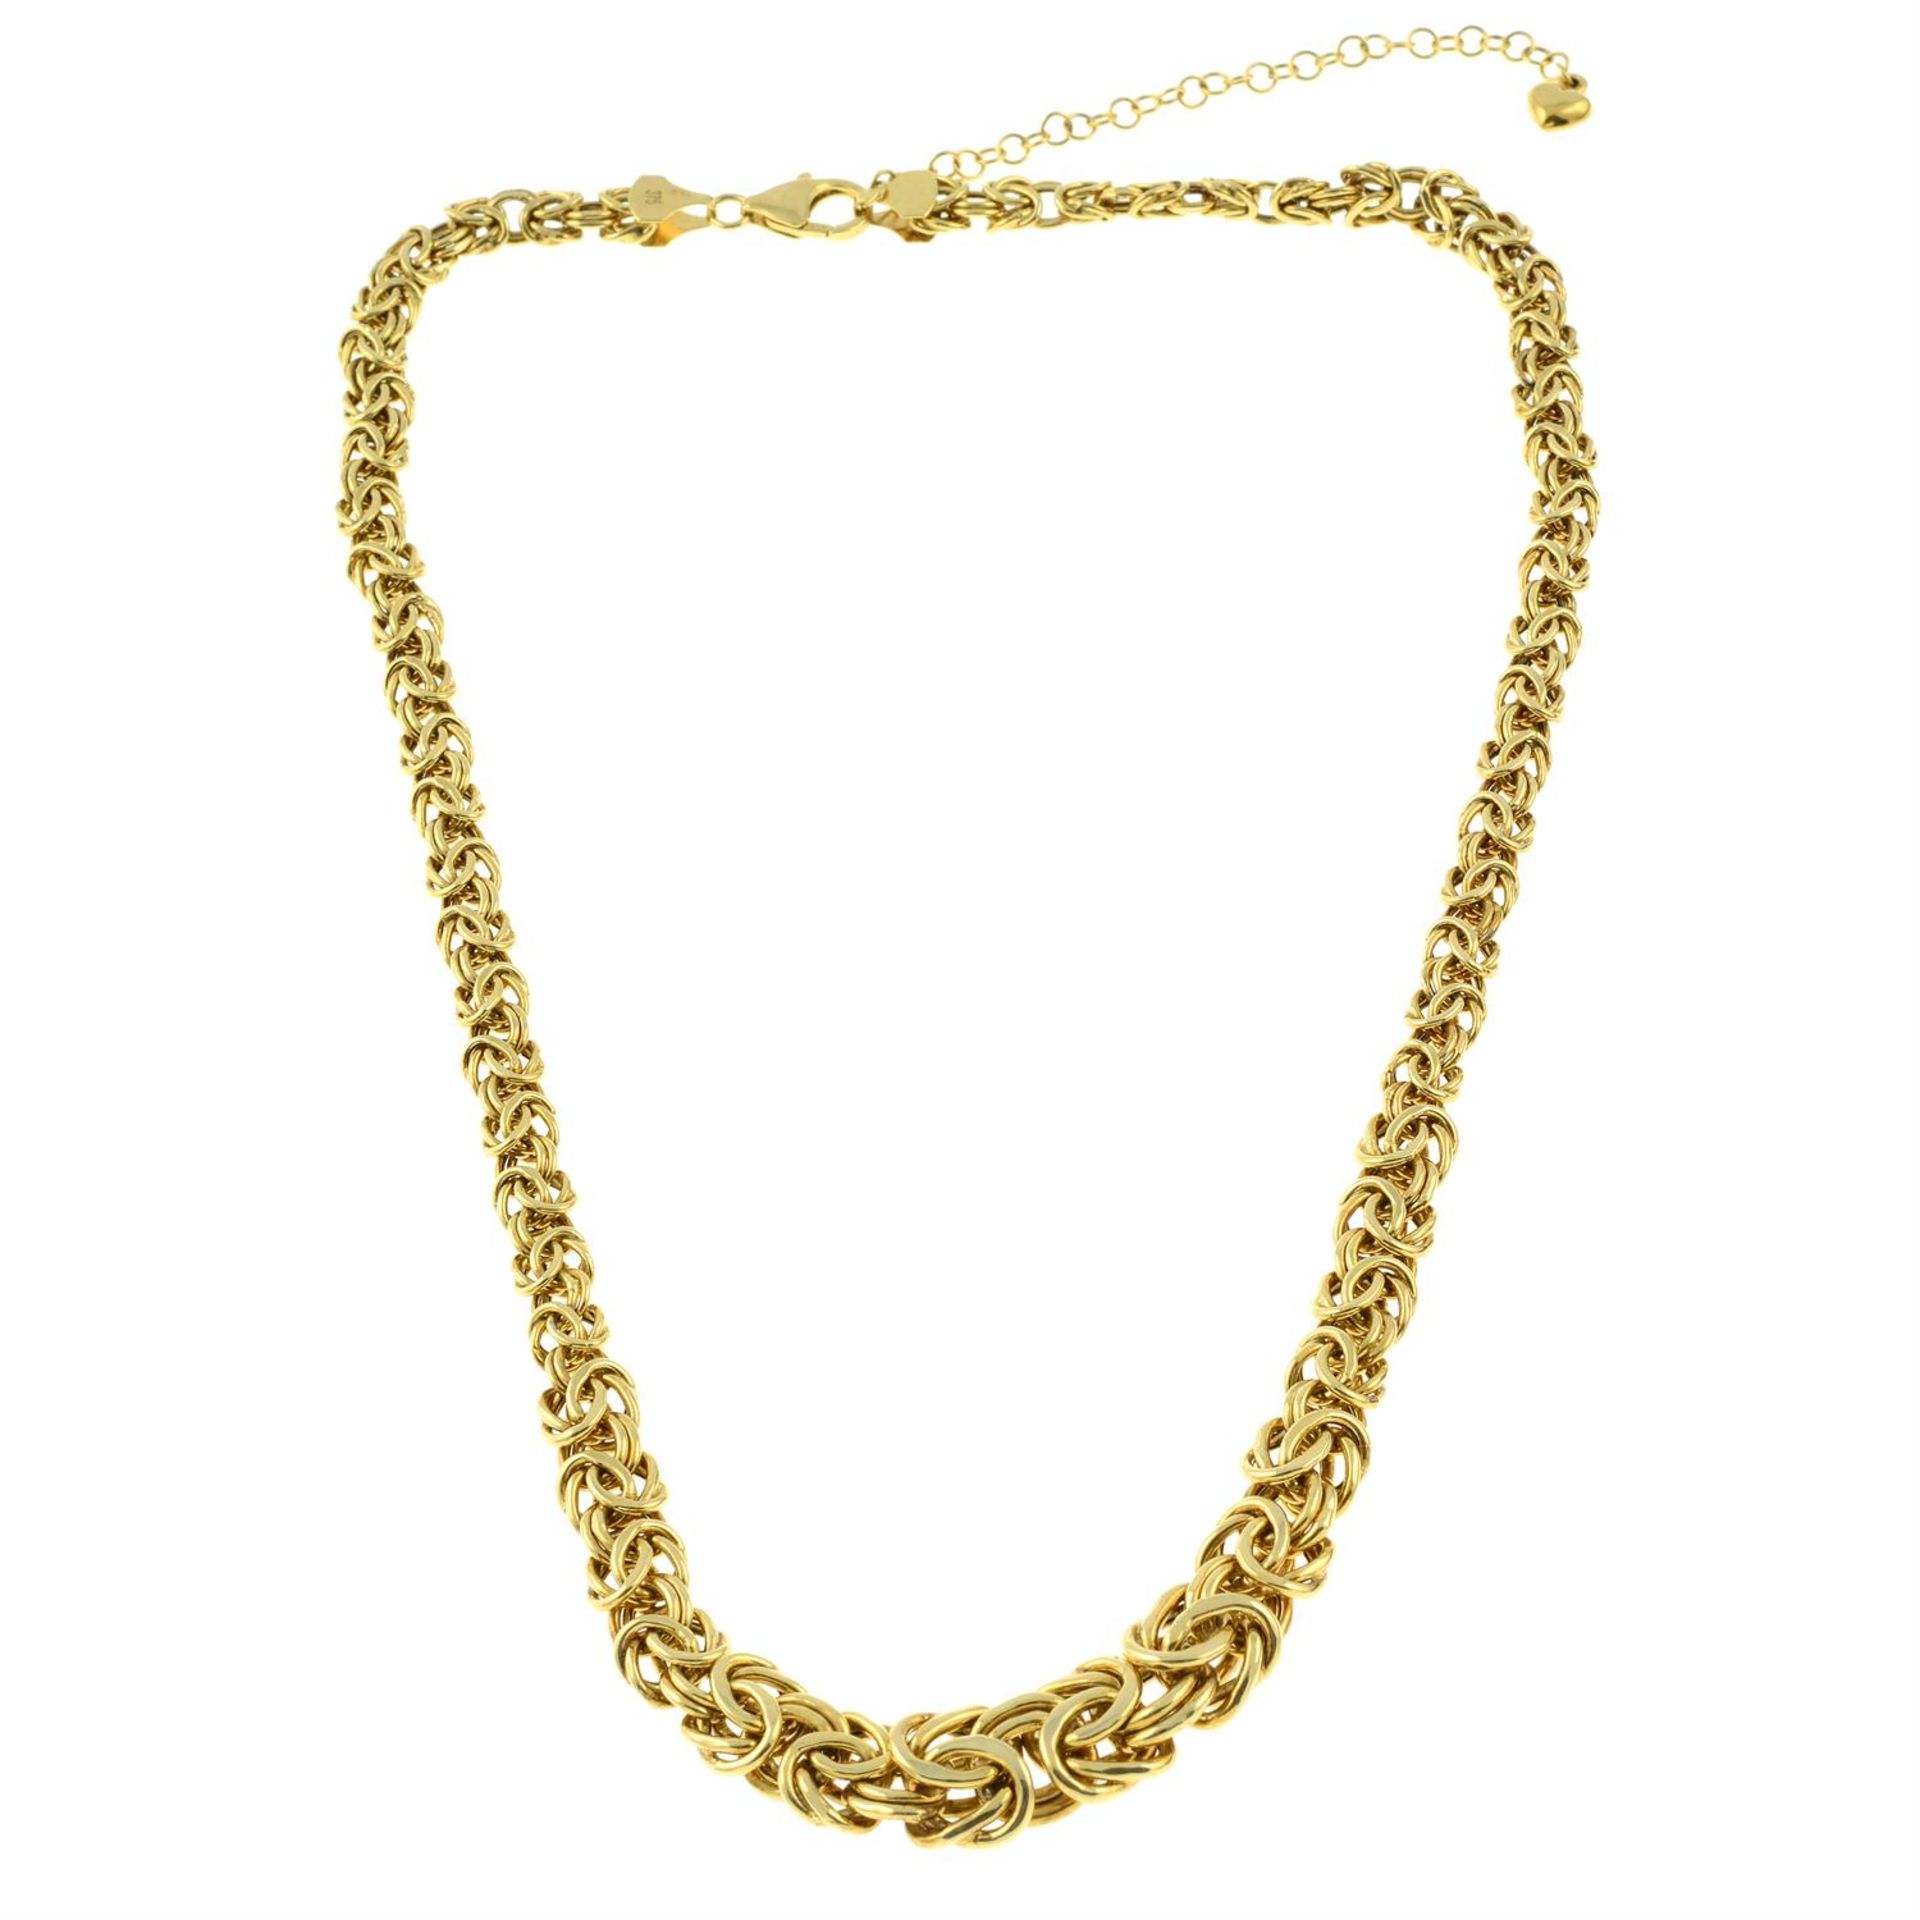 A 9ct gold fancy-link chain.